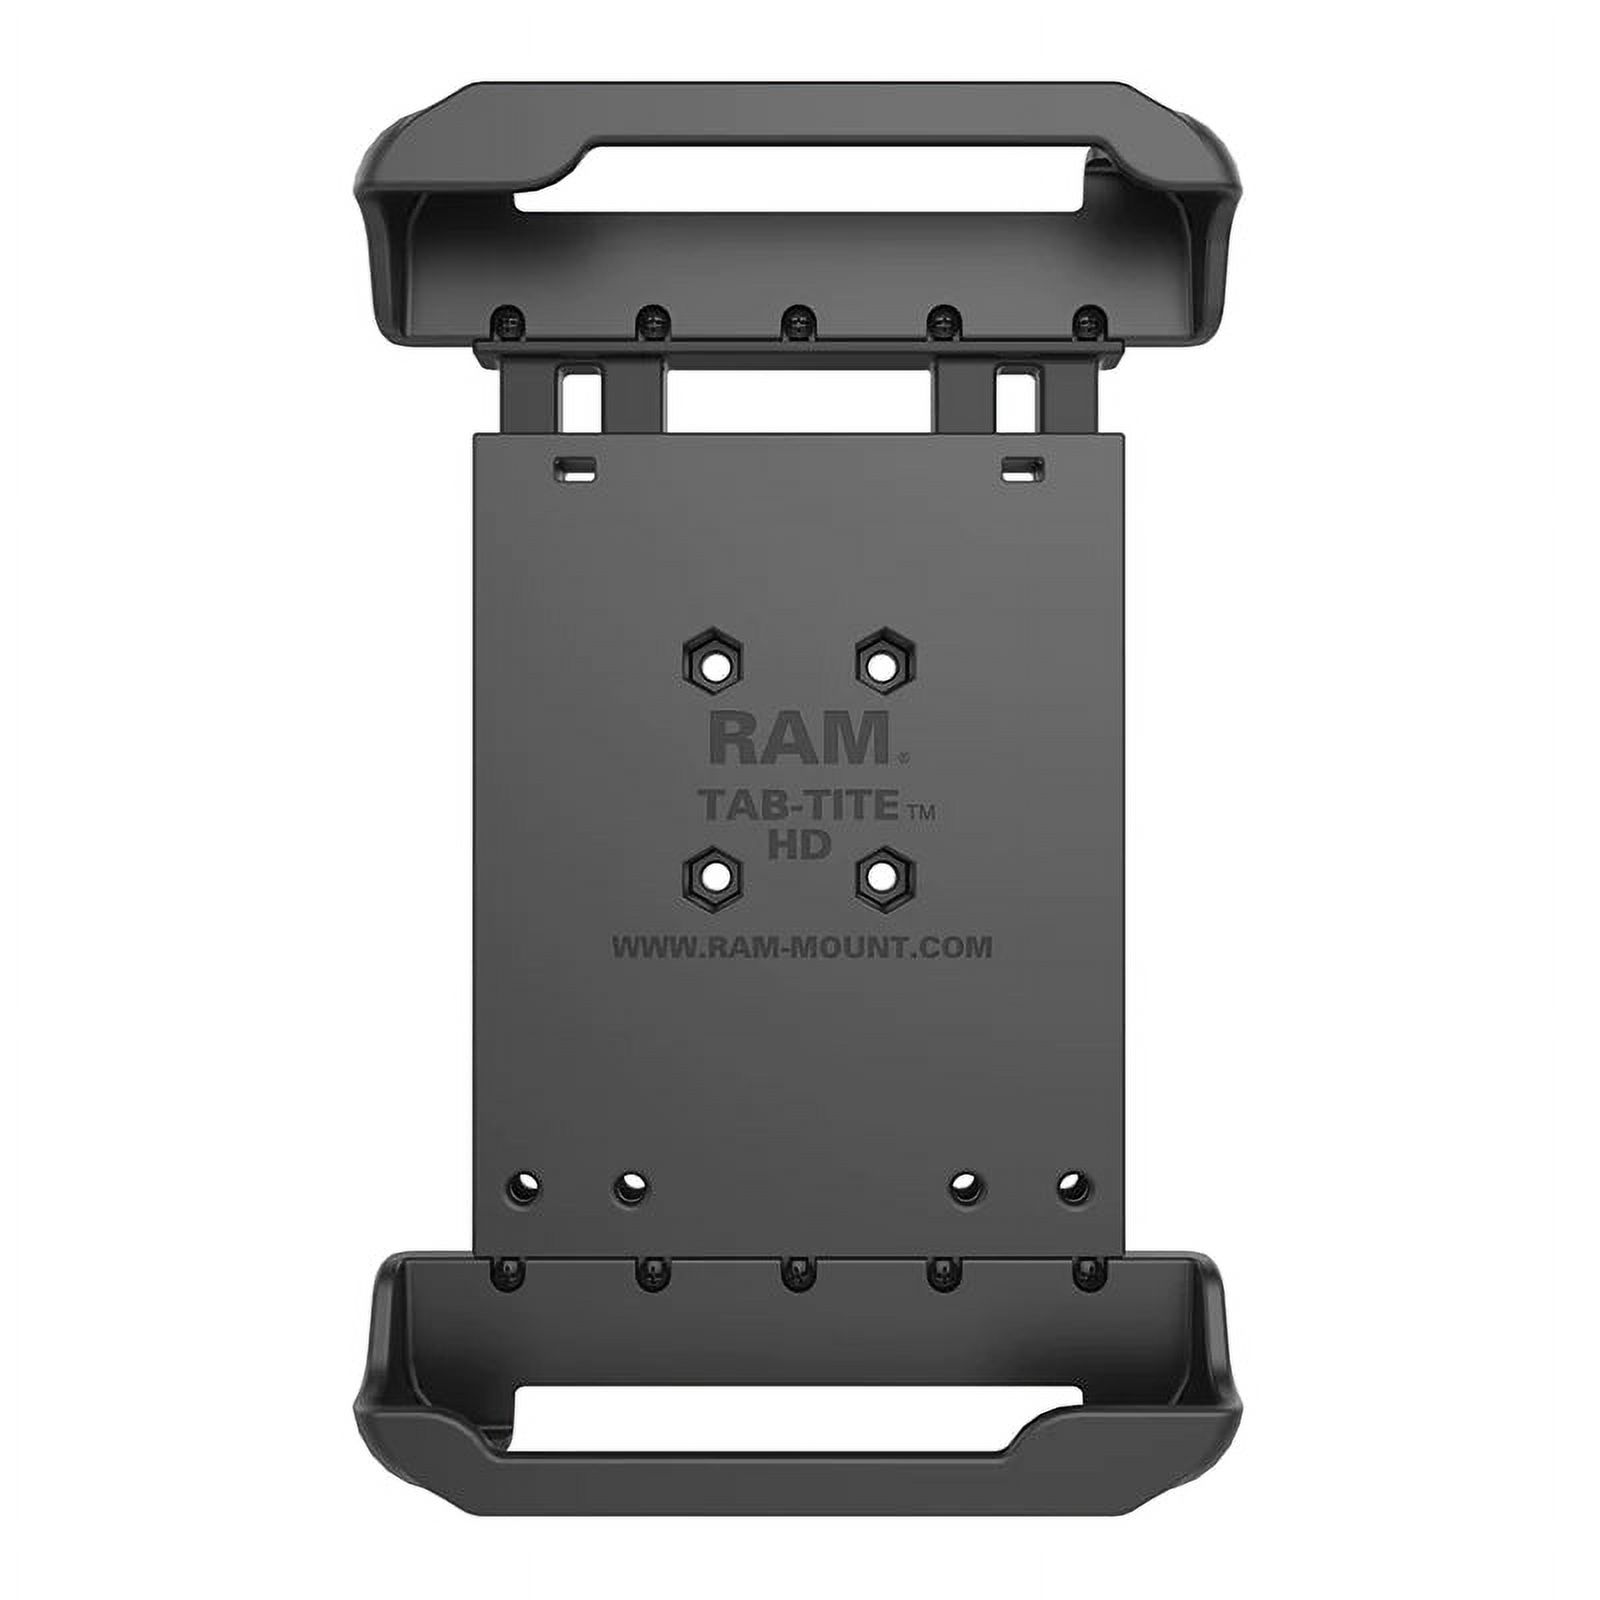 RAM Mounts Tab-Tite Vehicle Mount for Tablet - image 3 of 4